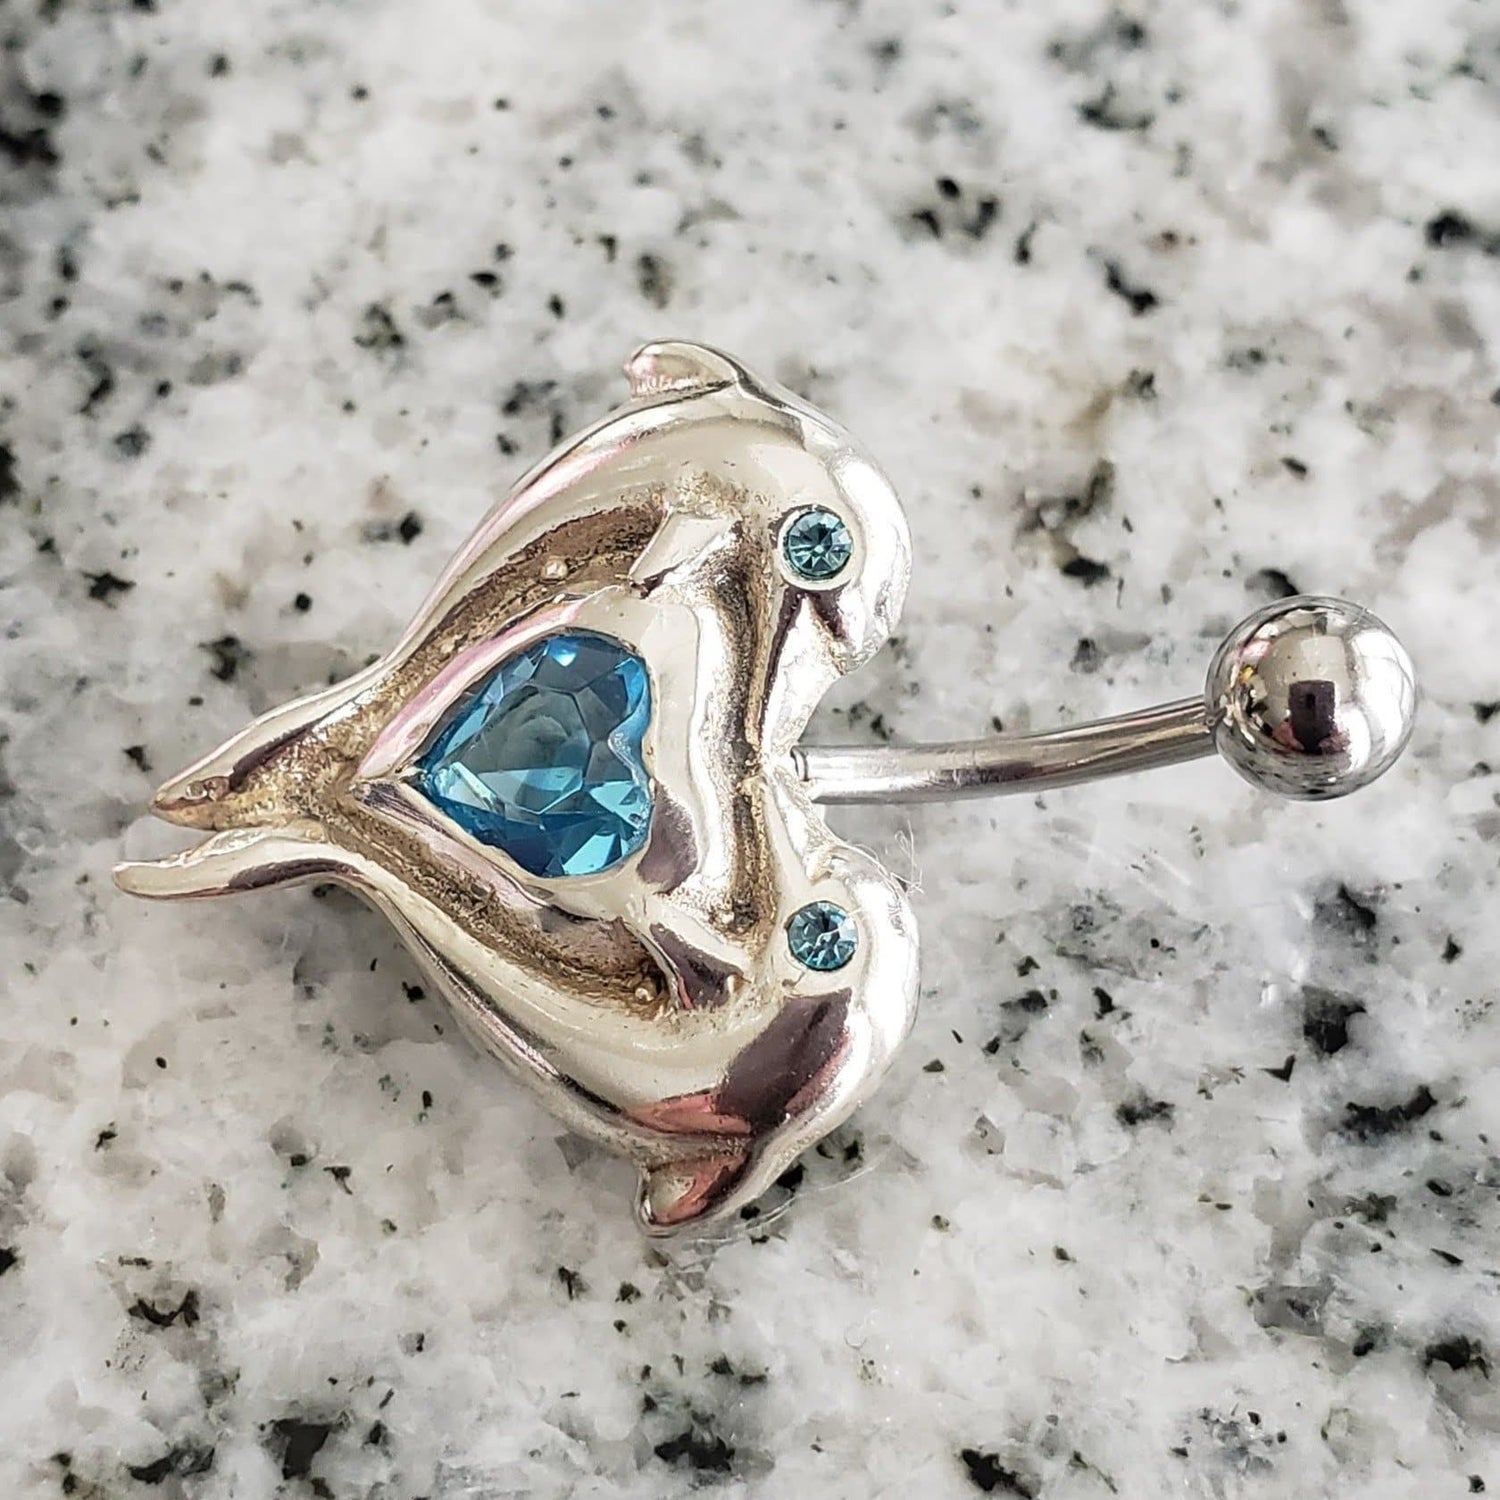 Dolphin Belly Ring | Surgical Steel and 925 Silver | Aquamarine Crystal | Canagem.com